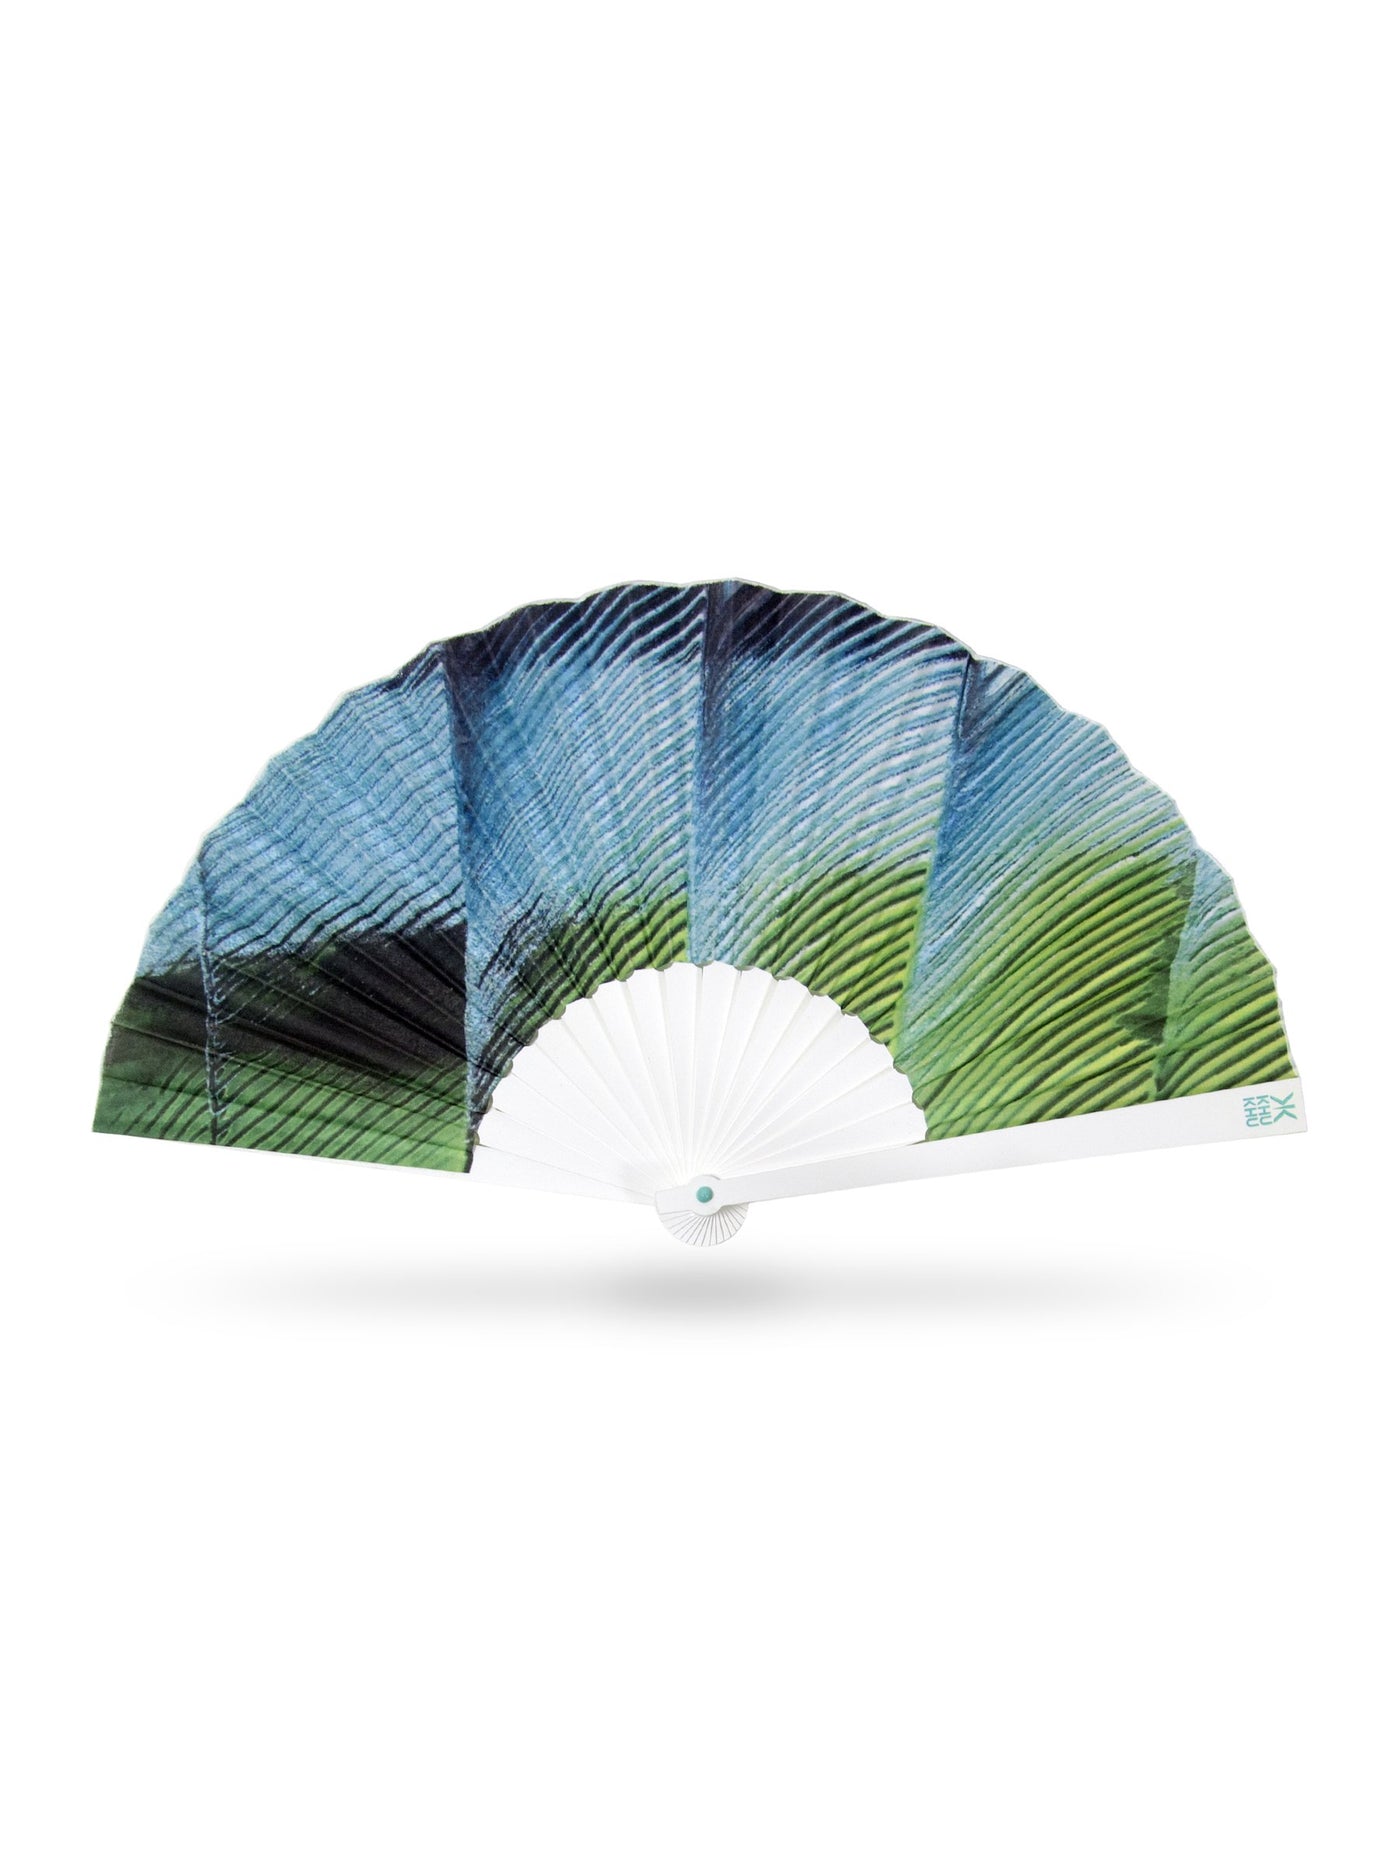 Khu Khu MACAW Tropical Bird Wing Print Hand-Fan in blue and green tones. Painted and then printed onto high grade cotton with swiss acrylic bespoke shape white sticks. Blue rivet and white rim. Engraved logo. 